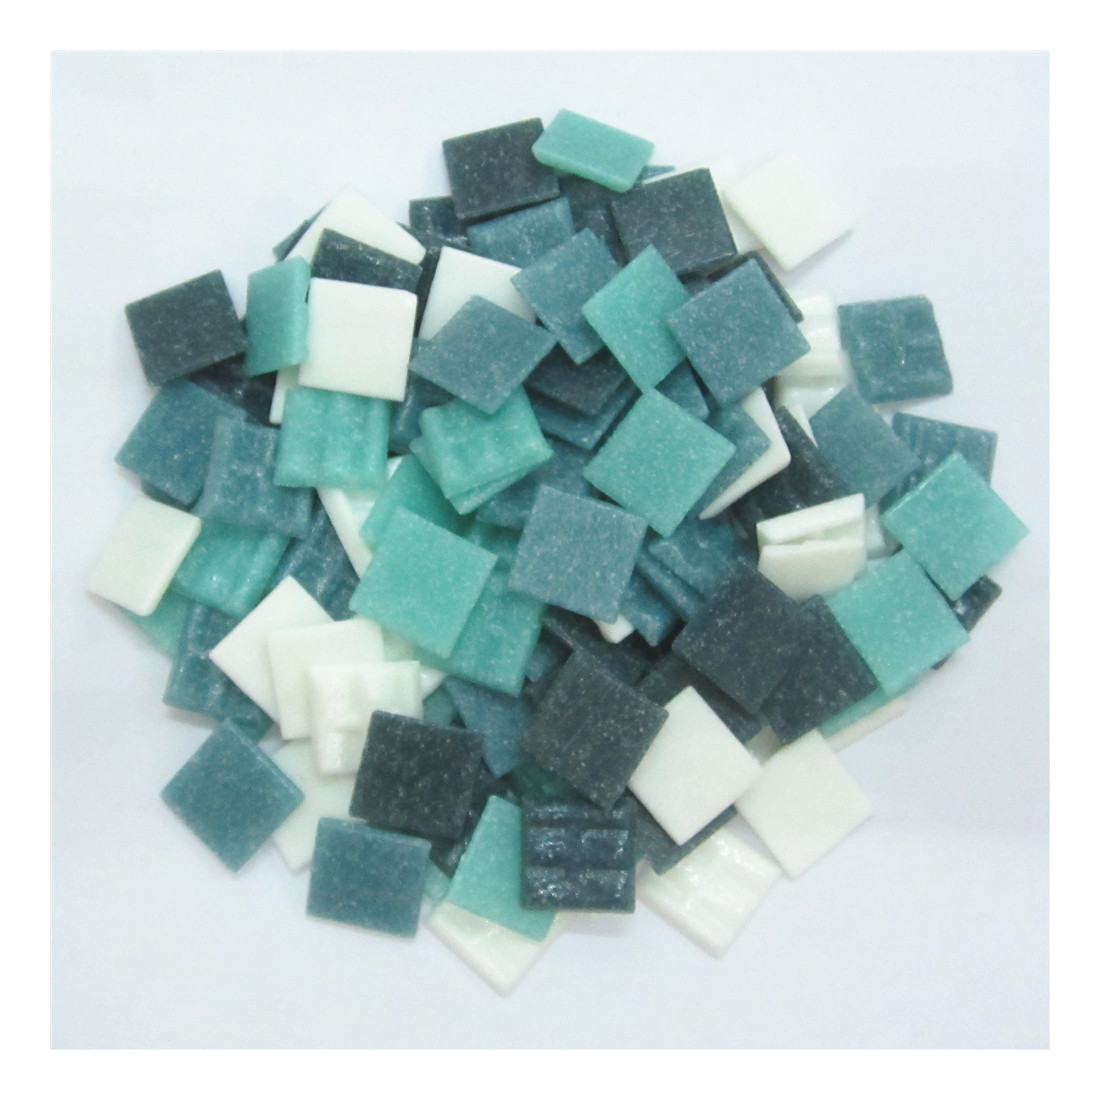 Mosaic Tiles Stained Glass Kit for Crafts Bulk Glass Mosaic Tiles